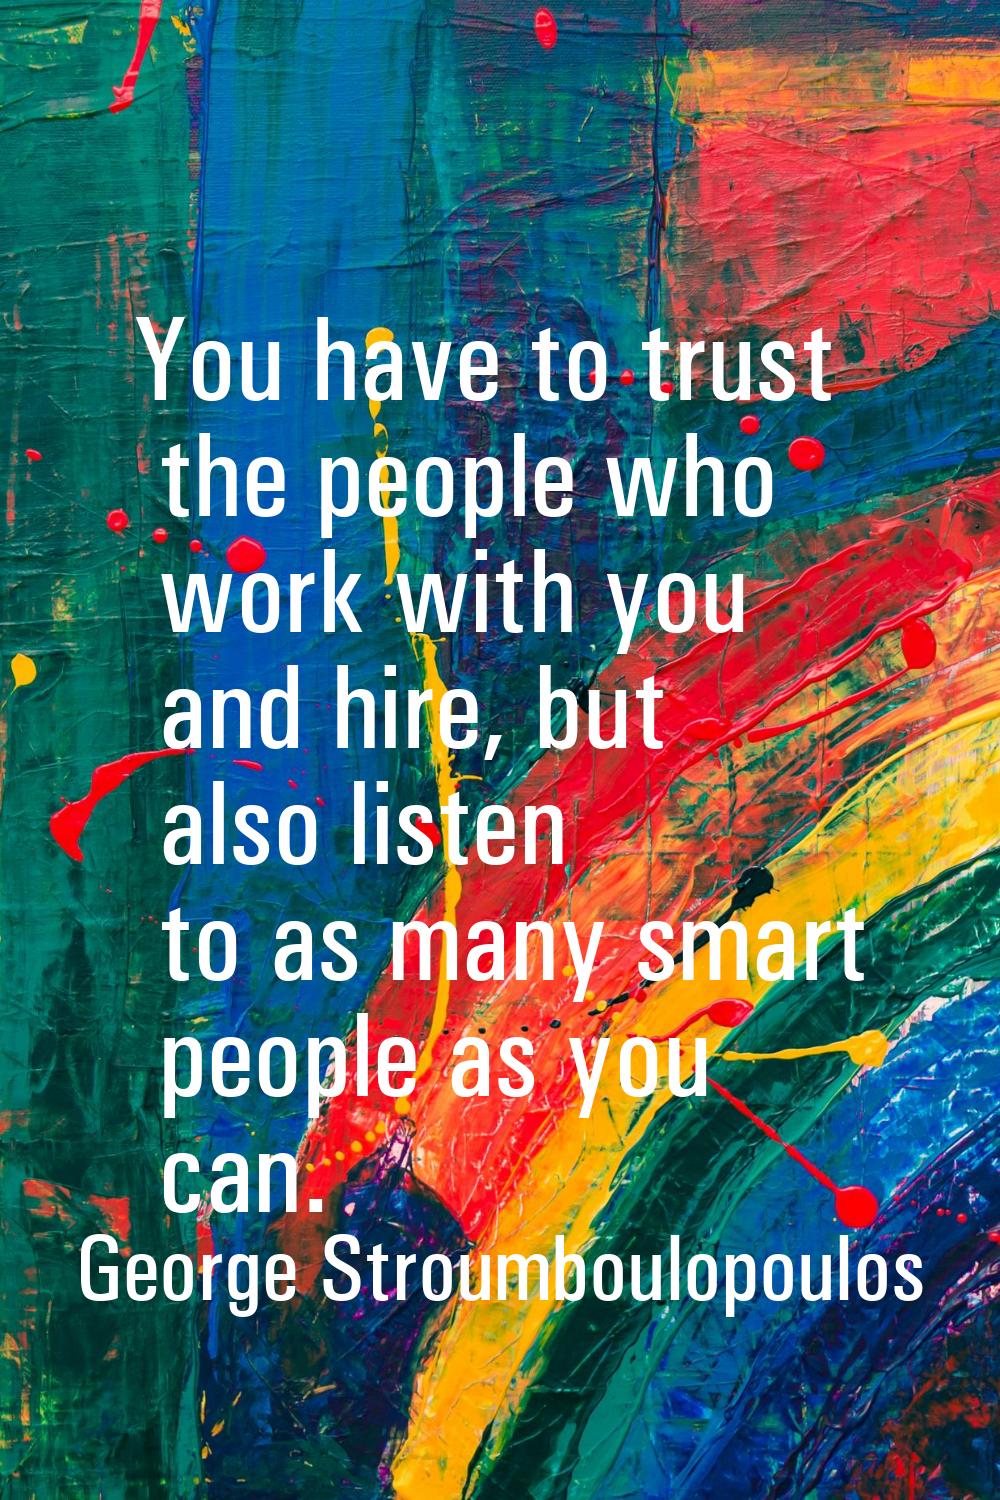 You have to trust the people who work with you and hire, but also listen to as many smart people as